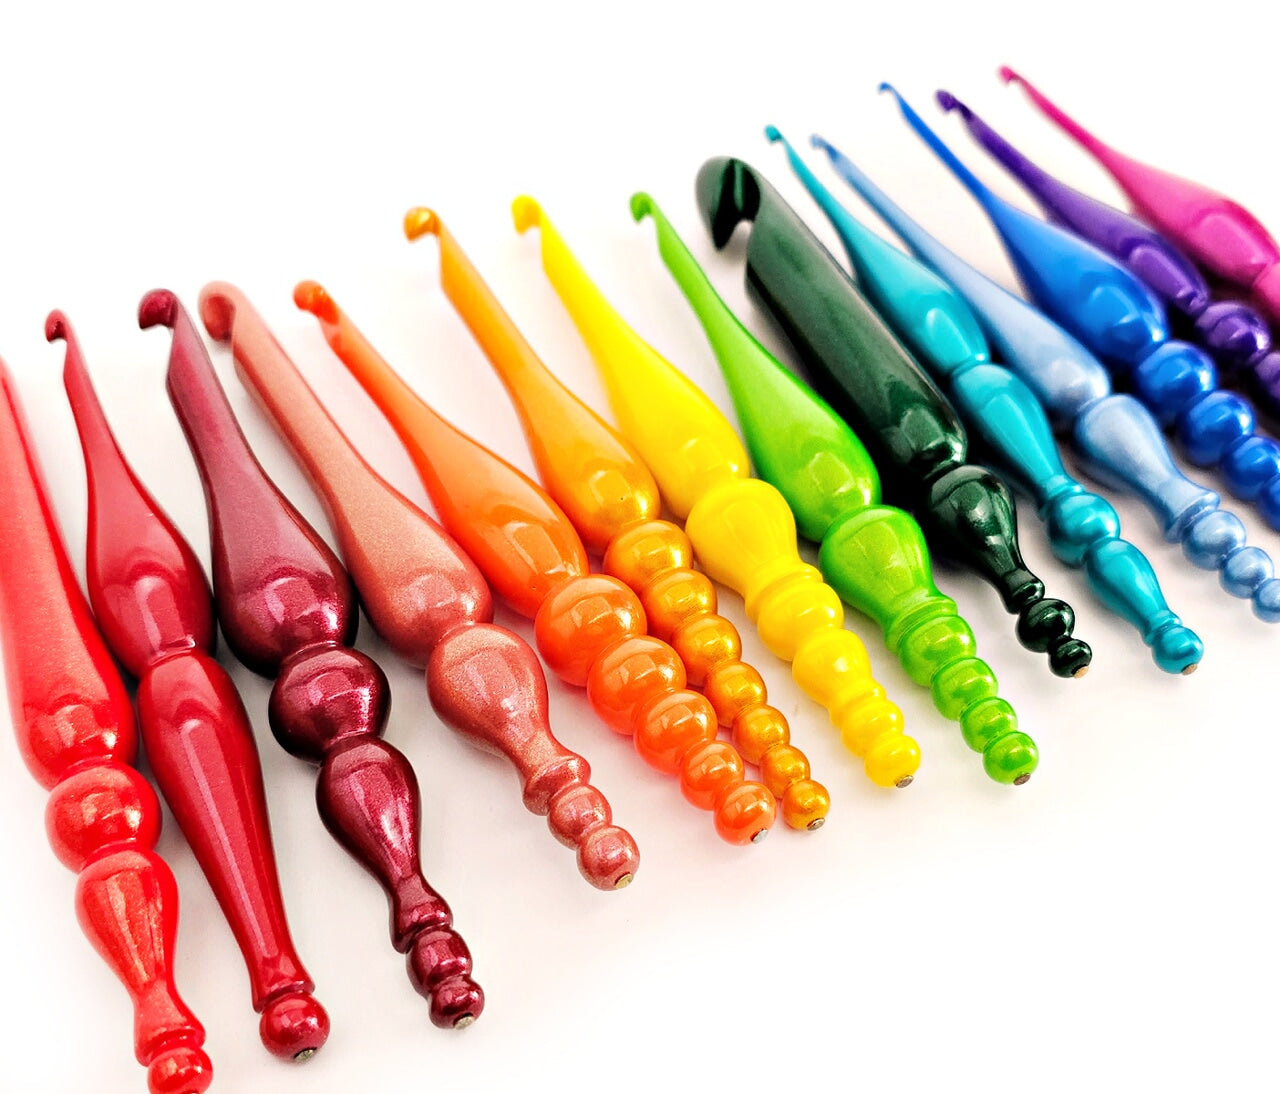 Candy Shop Crochet Hooks: Choose from Sizes F, G, H and I